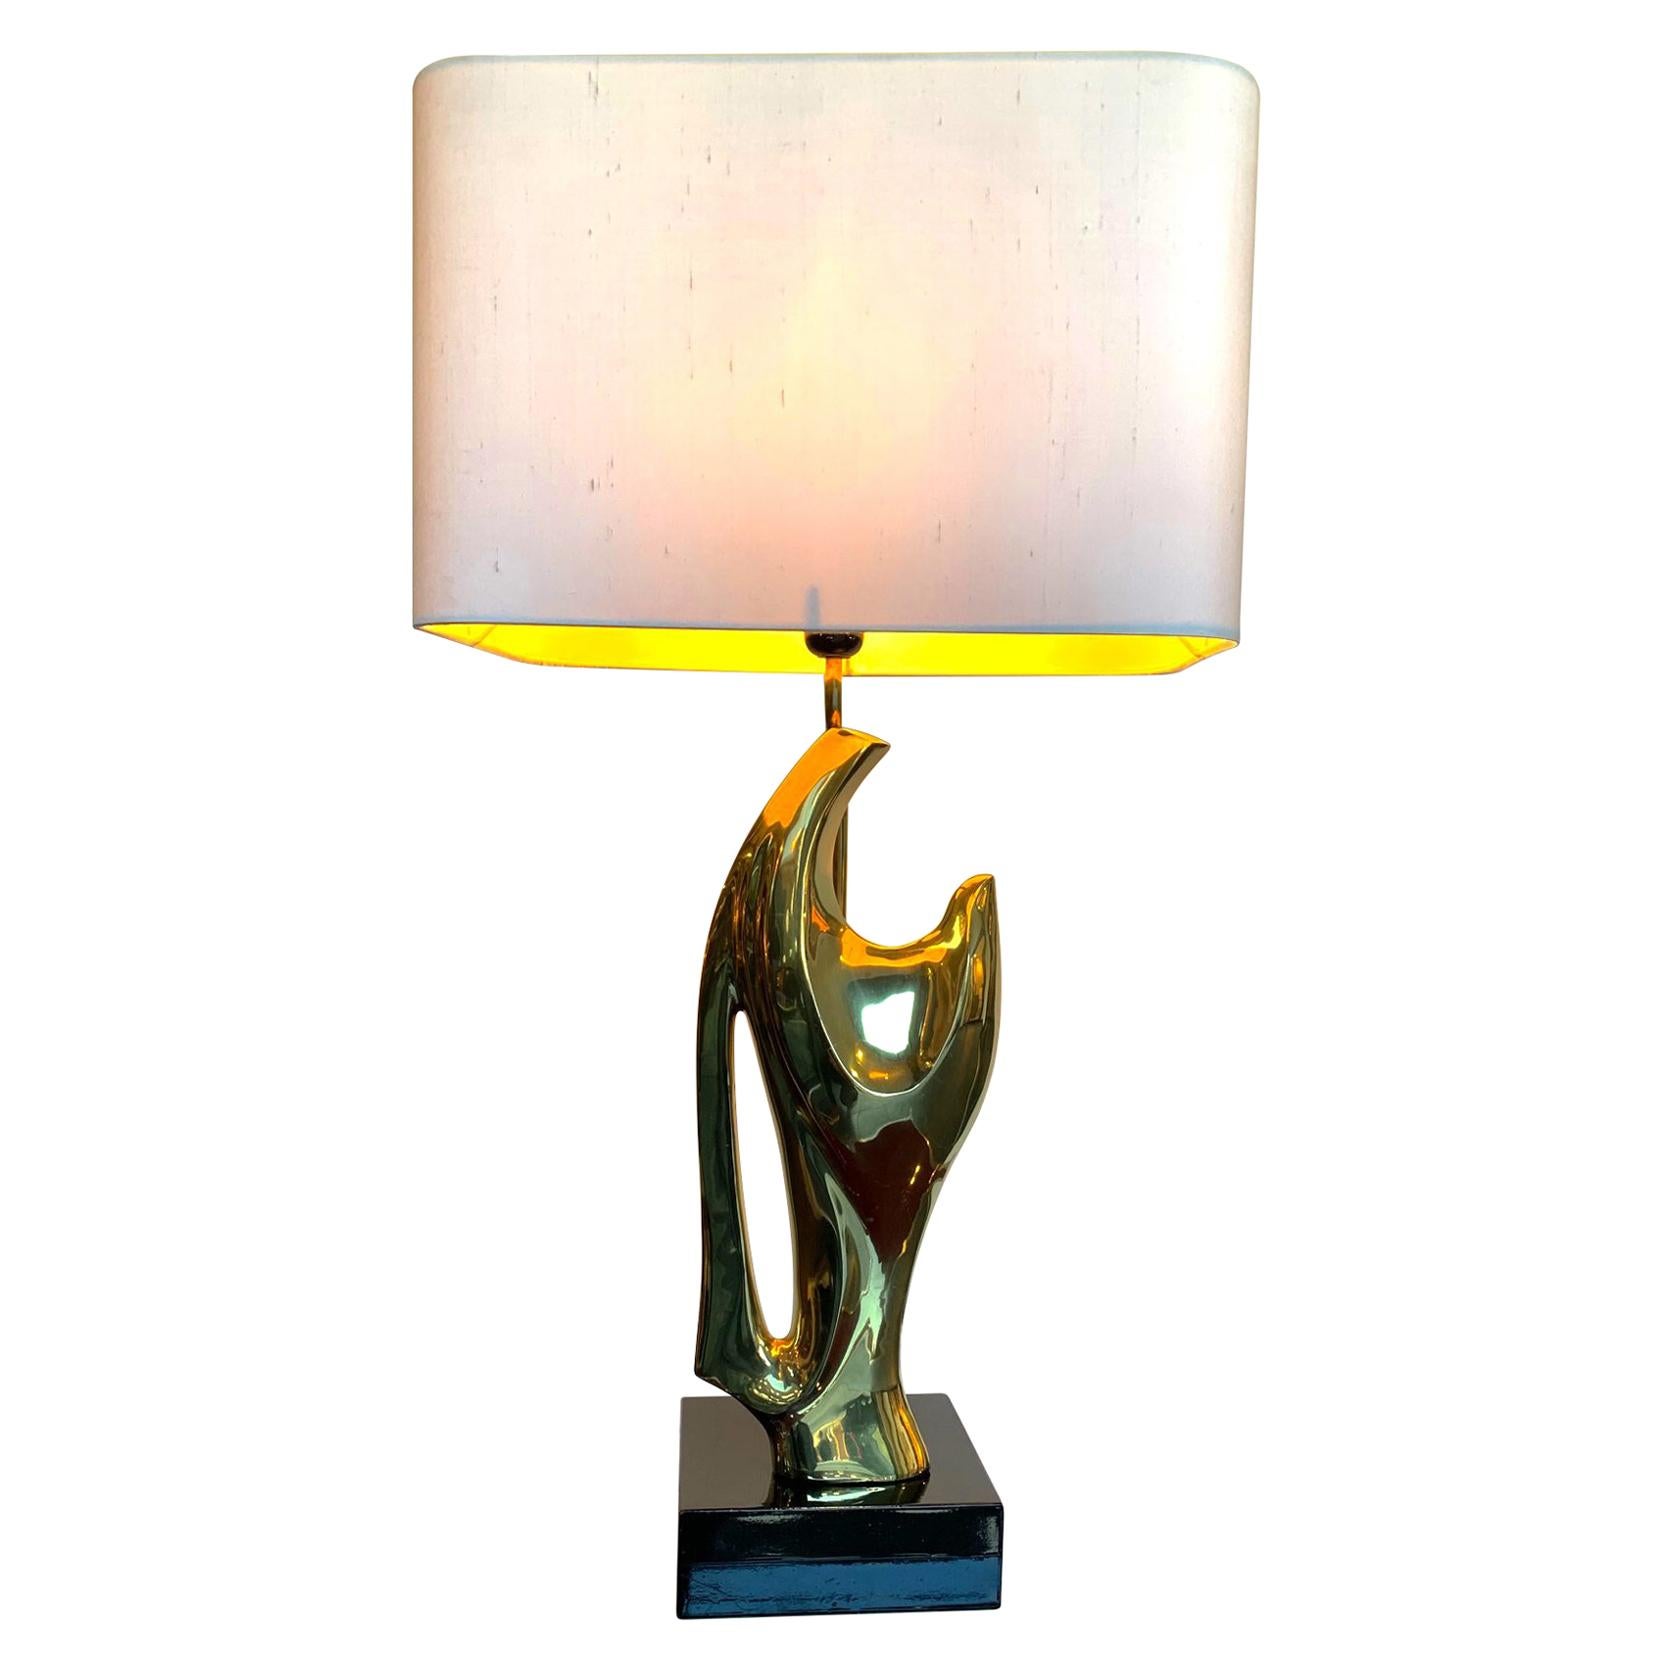 1970s Sculptural Lamp in the Style of Alain Chervet with Black Lacquered Base